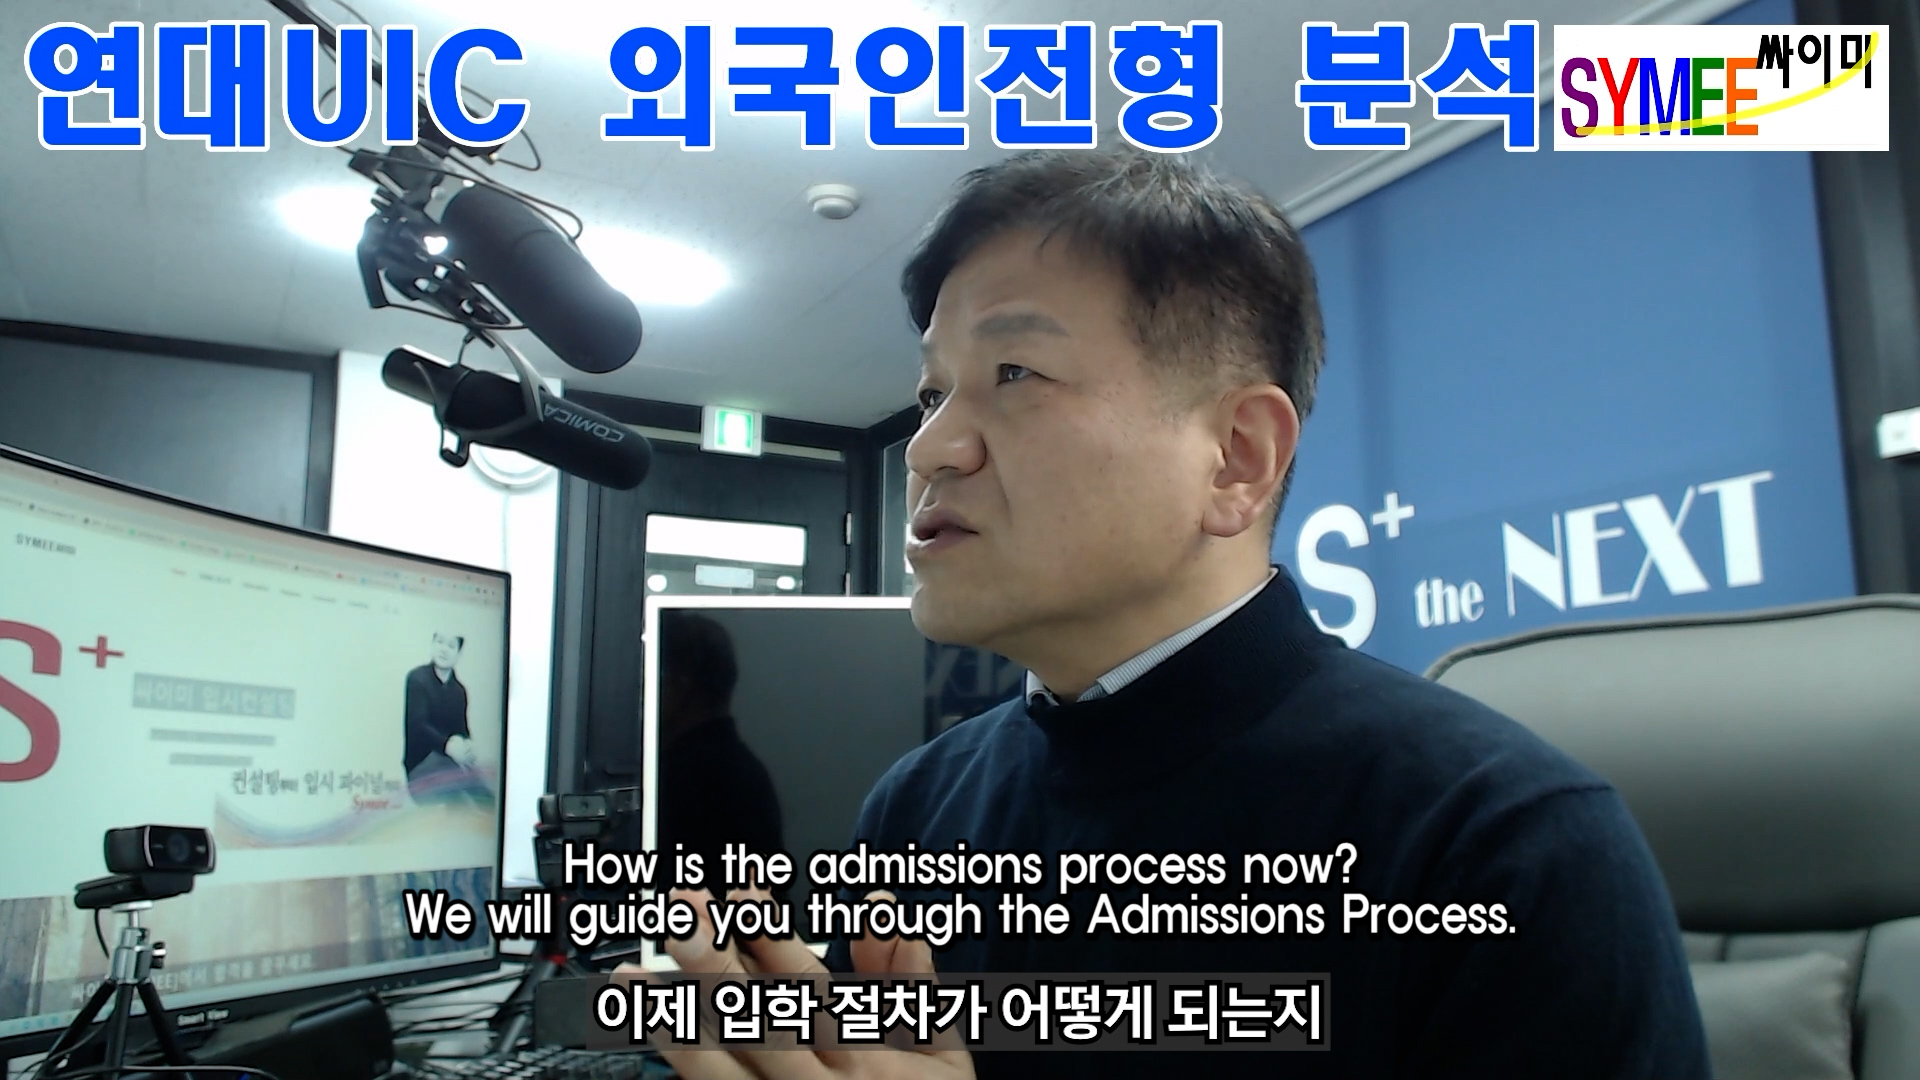 Yonsei Univ. Admission for UIC for Foreign Student 04 Admission Factors.00_00_00_57.스틸 001.jpg